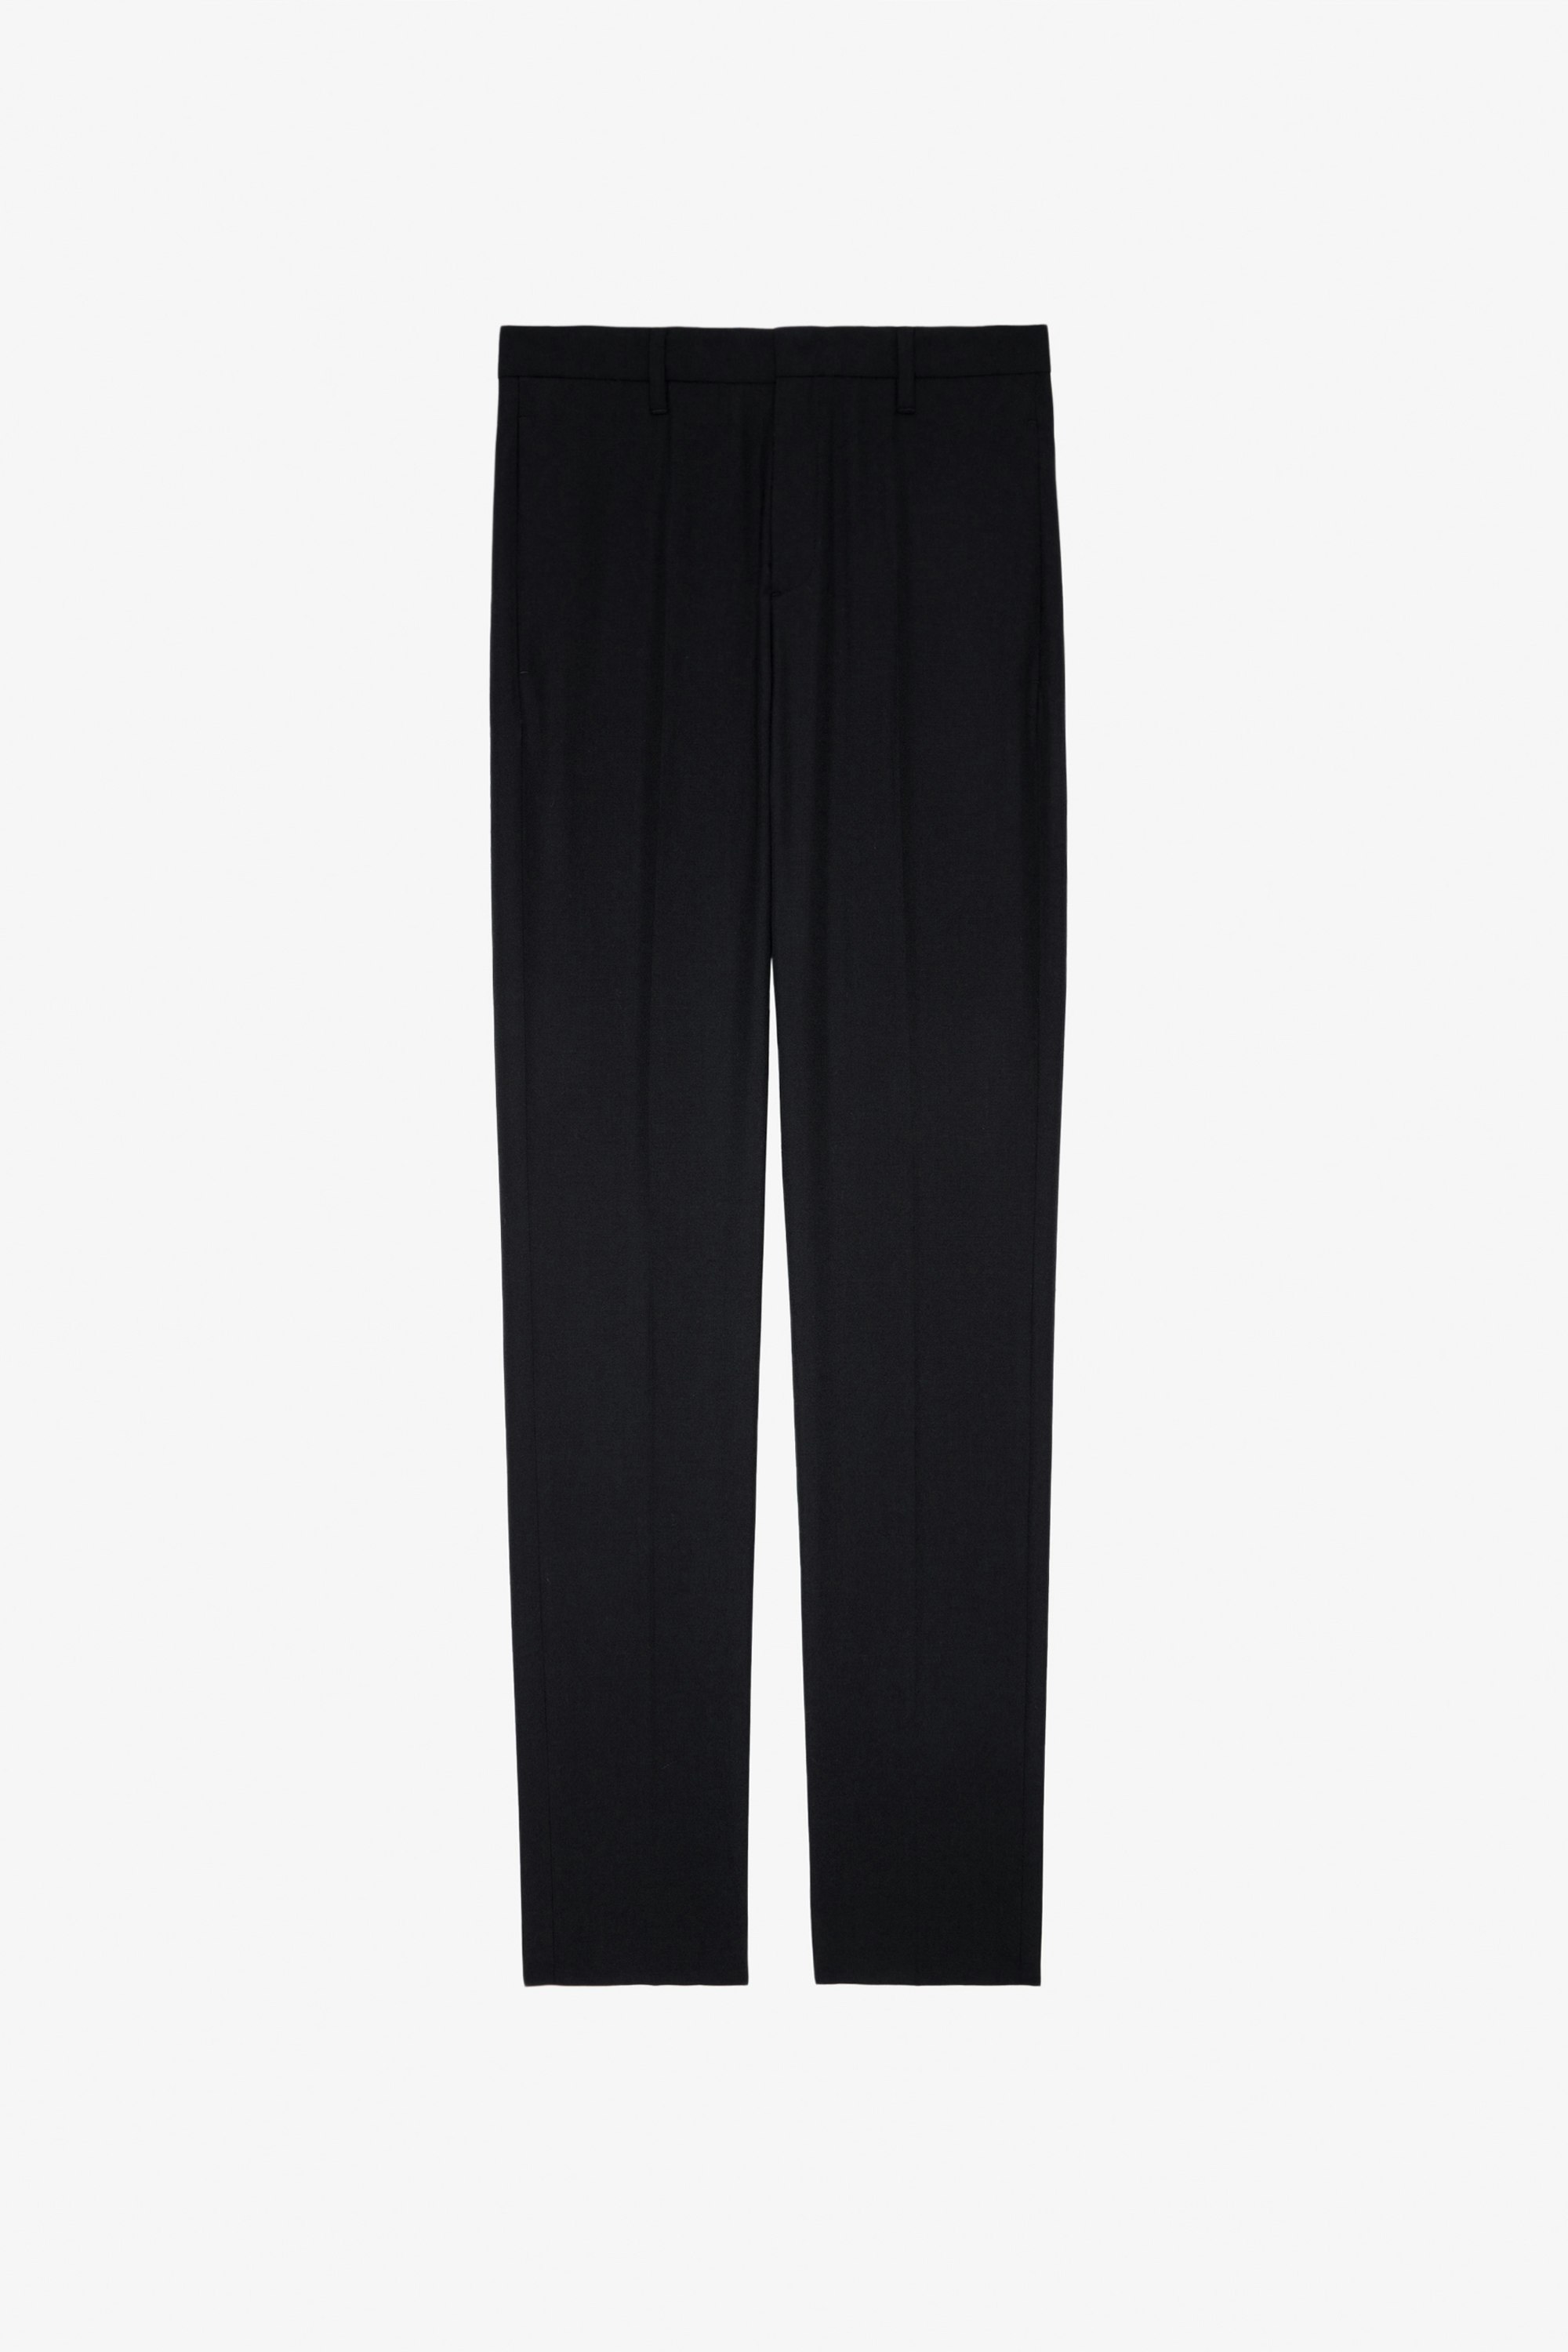 Paris Trousers - Unisex's tailored black wool trousers with studio insignia on back.